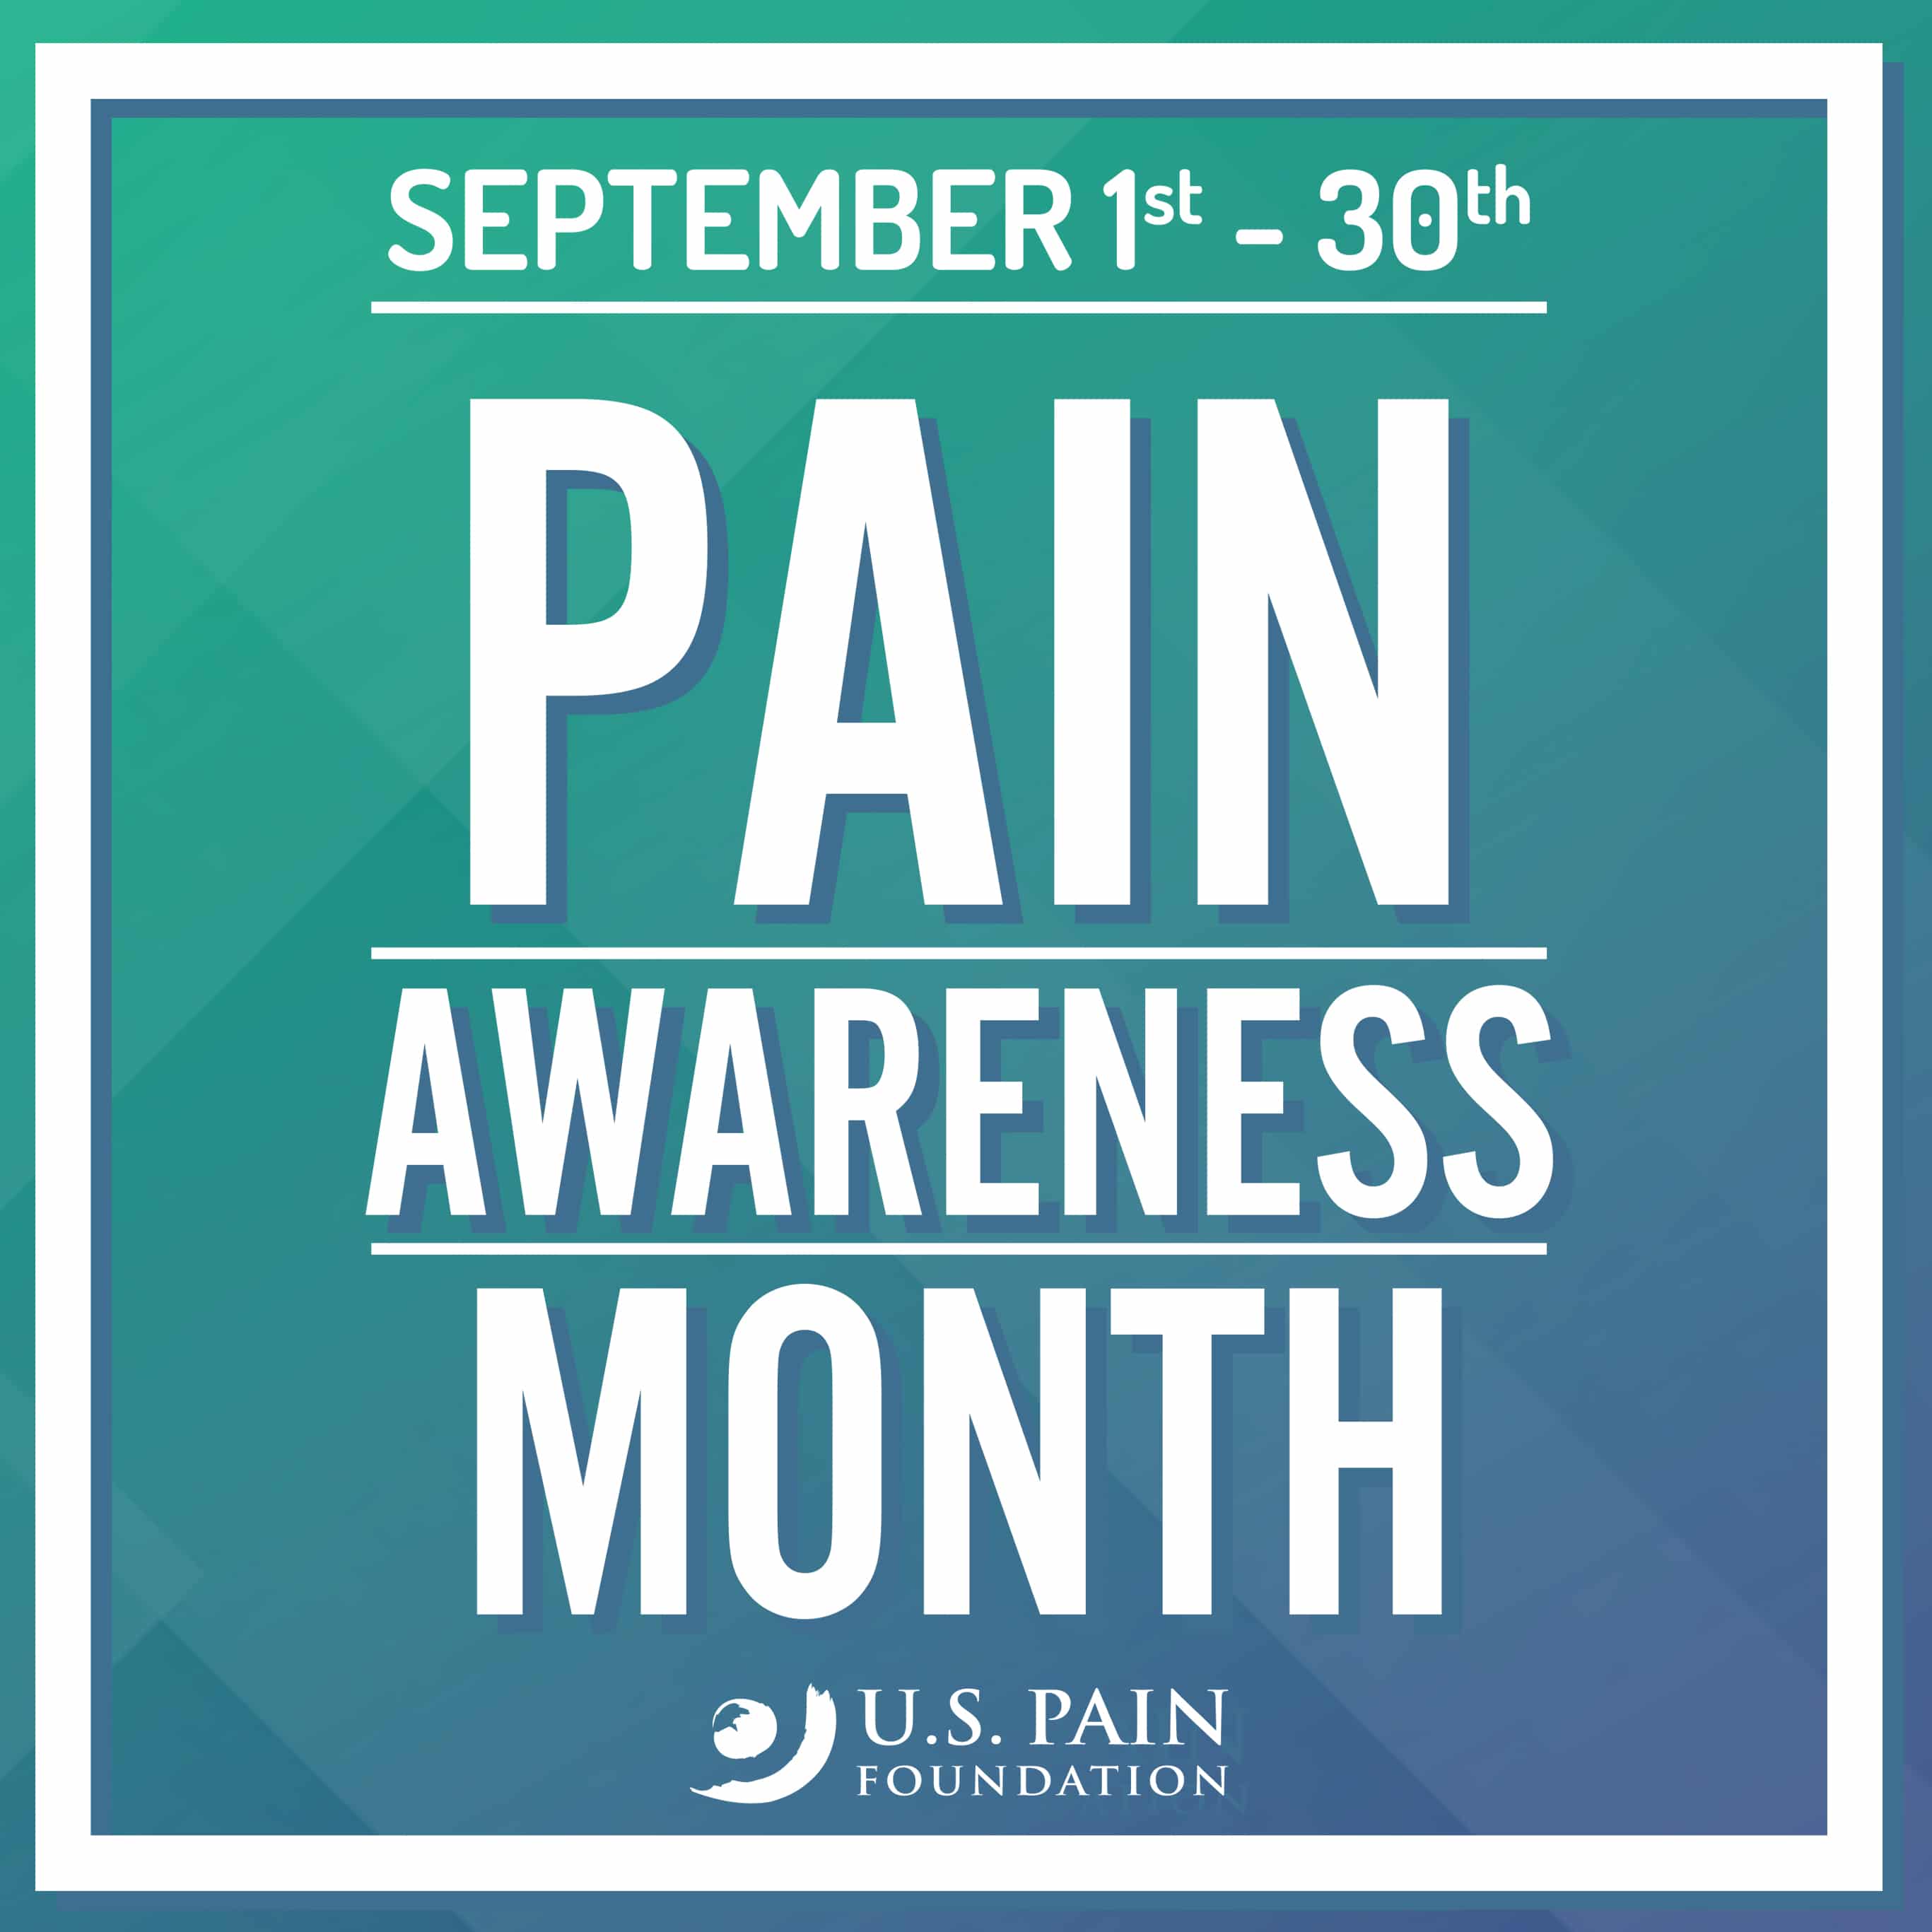 Pain Awareness Month campaign highlights gaps in pain care